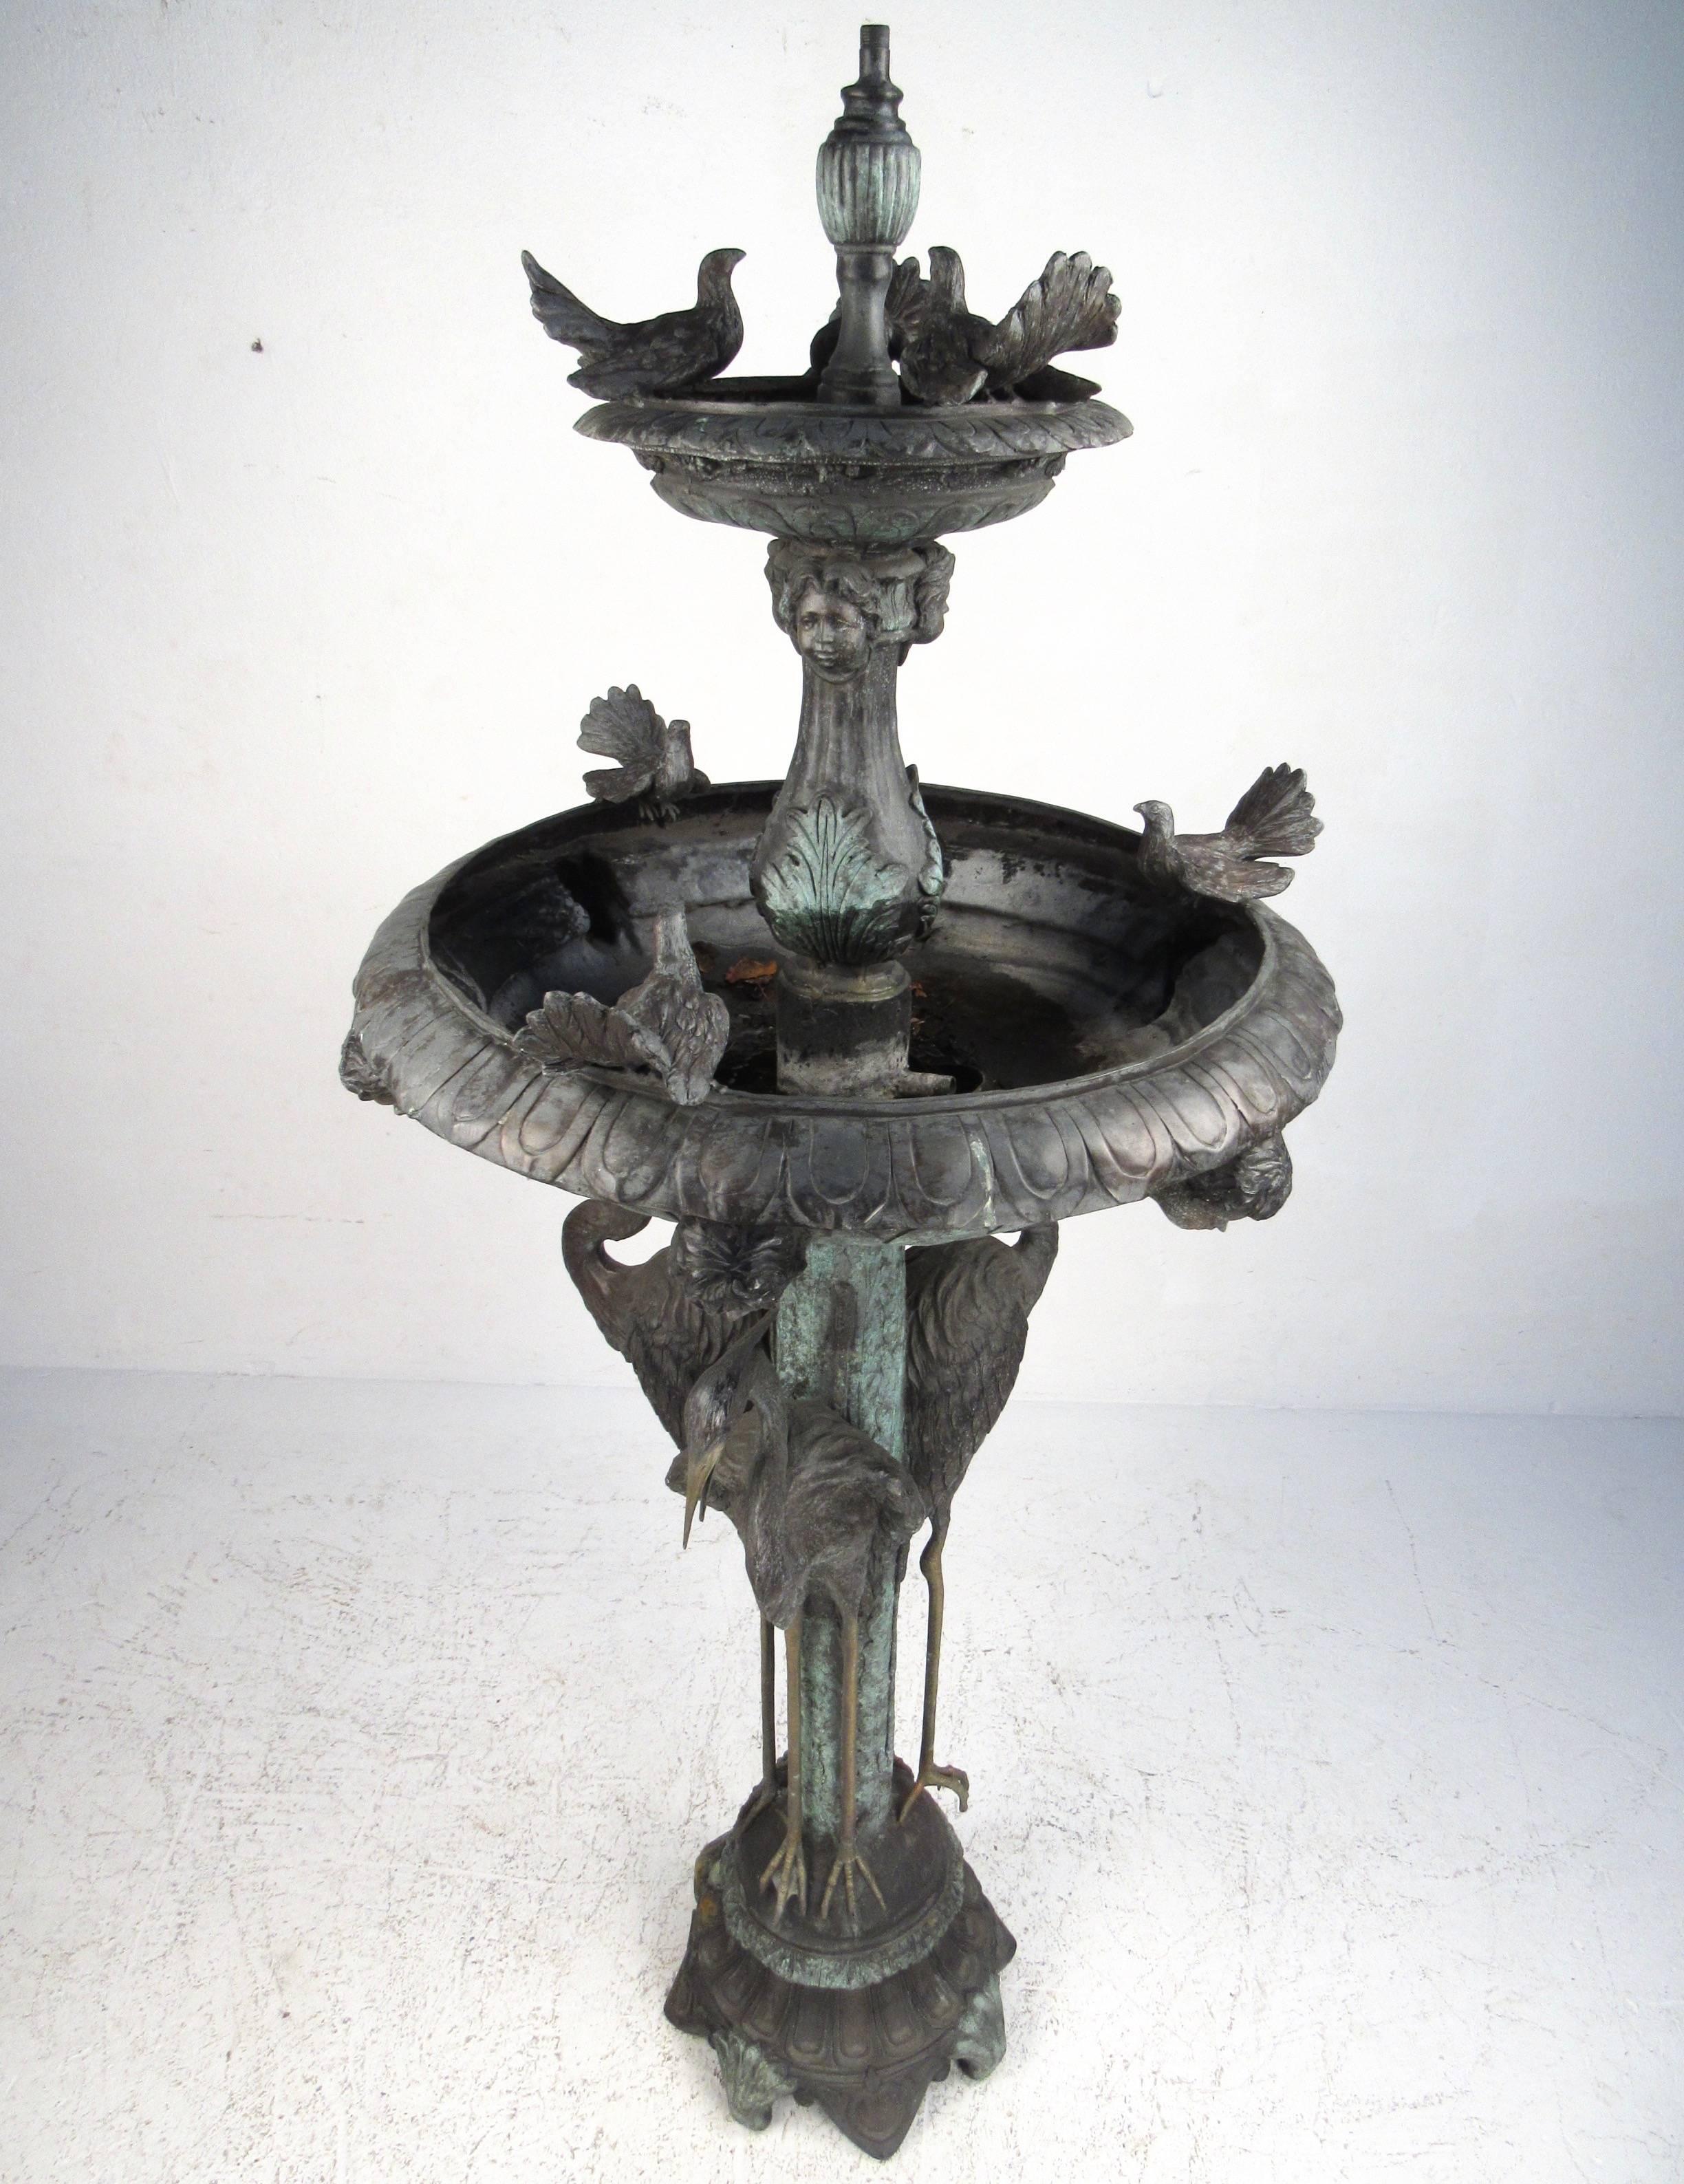 This exquisite bronze garden fountain features wonderful detail throughout it's dual basin cascading water feature design. Bird bath, egrets, and cherub face details add to the impressive stature of this well patinated piece. Please confirm item